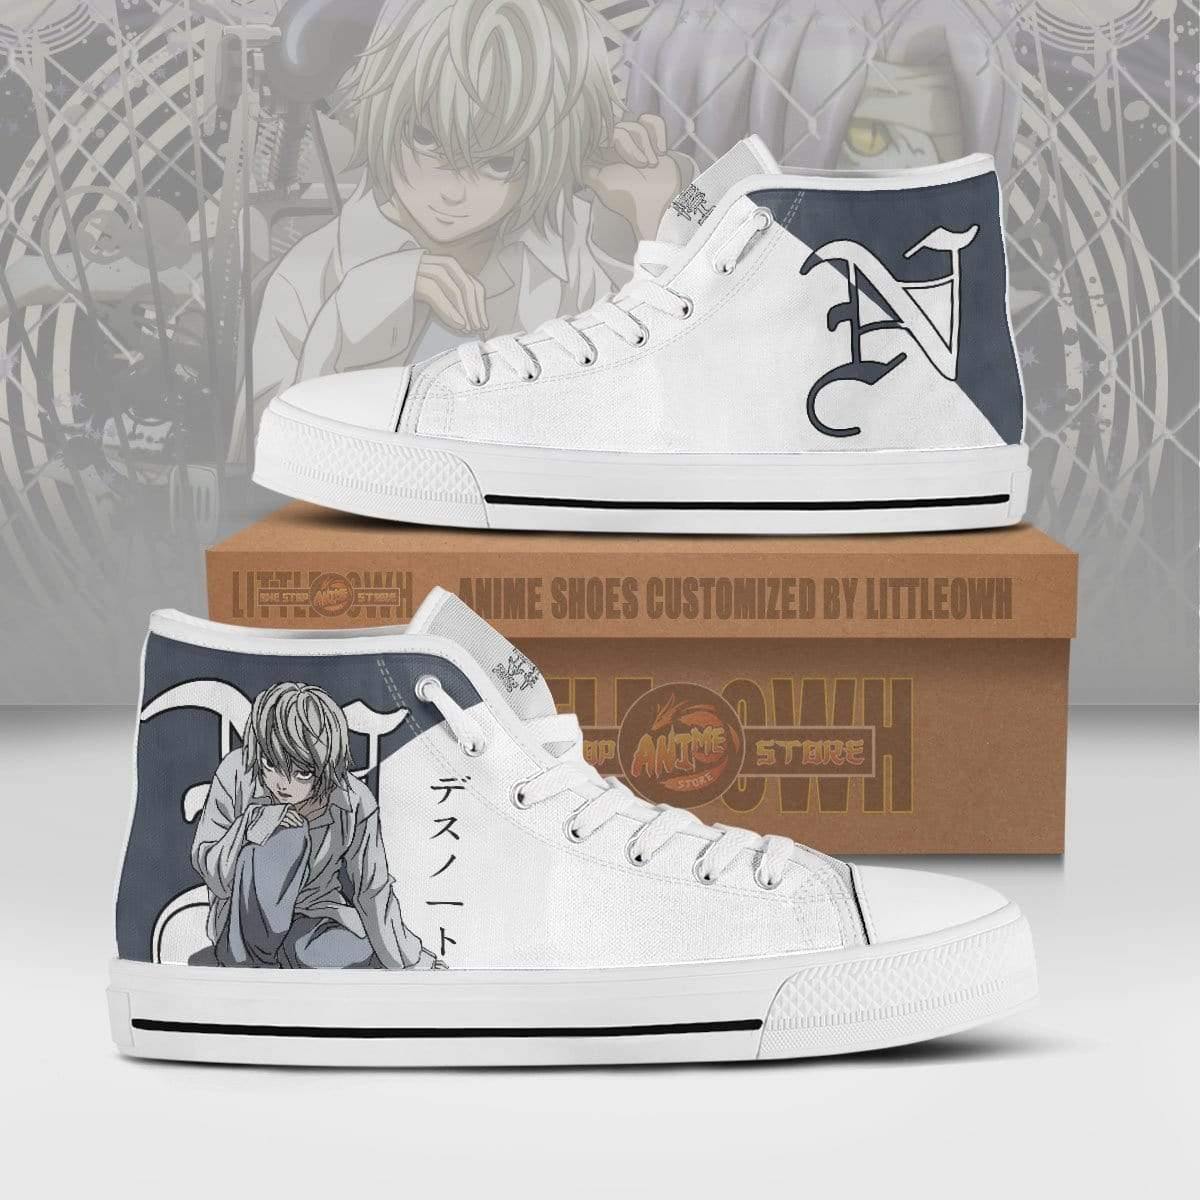 Near High Top Canvas Shoes Custom Death Note Anime Sneakers